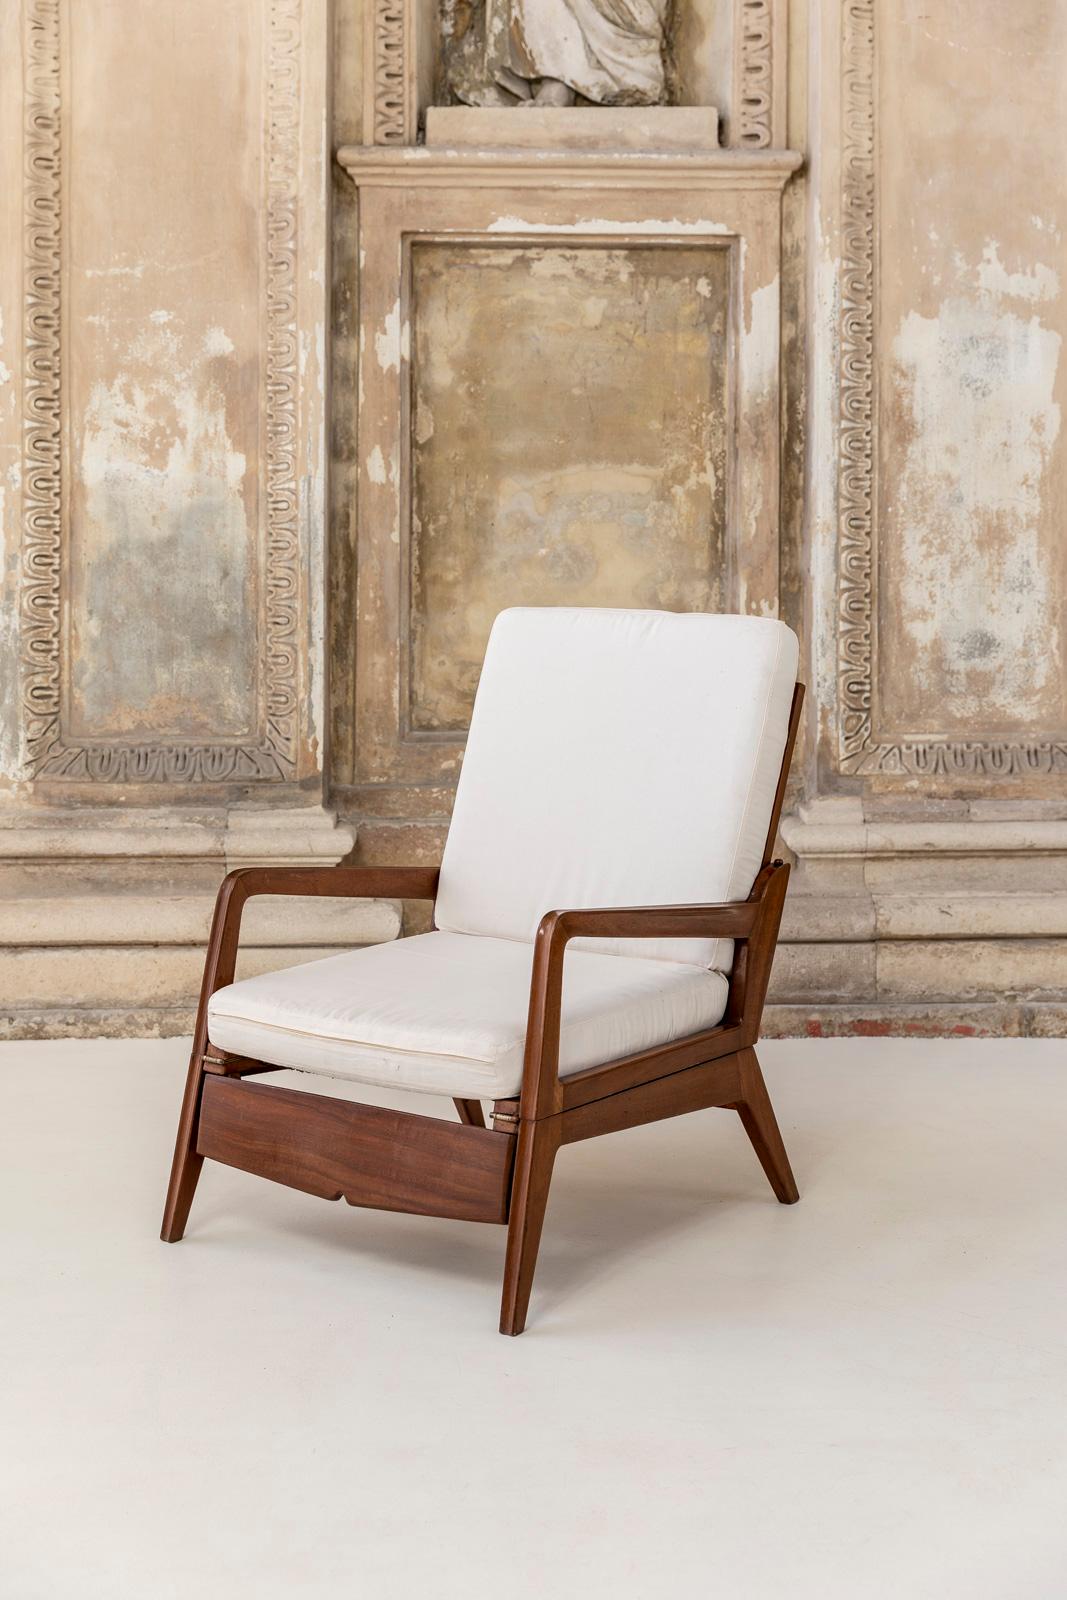 This armchair can be easily transform from armchair to triclinium. Accessorized with white seat cushion.
Solid structure in wood and perfect conditions. 

Dimensions when open: 120 cm (W) x 78 cm (D) x 42 (H with cushion).